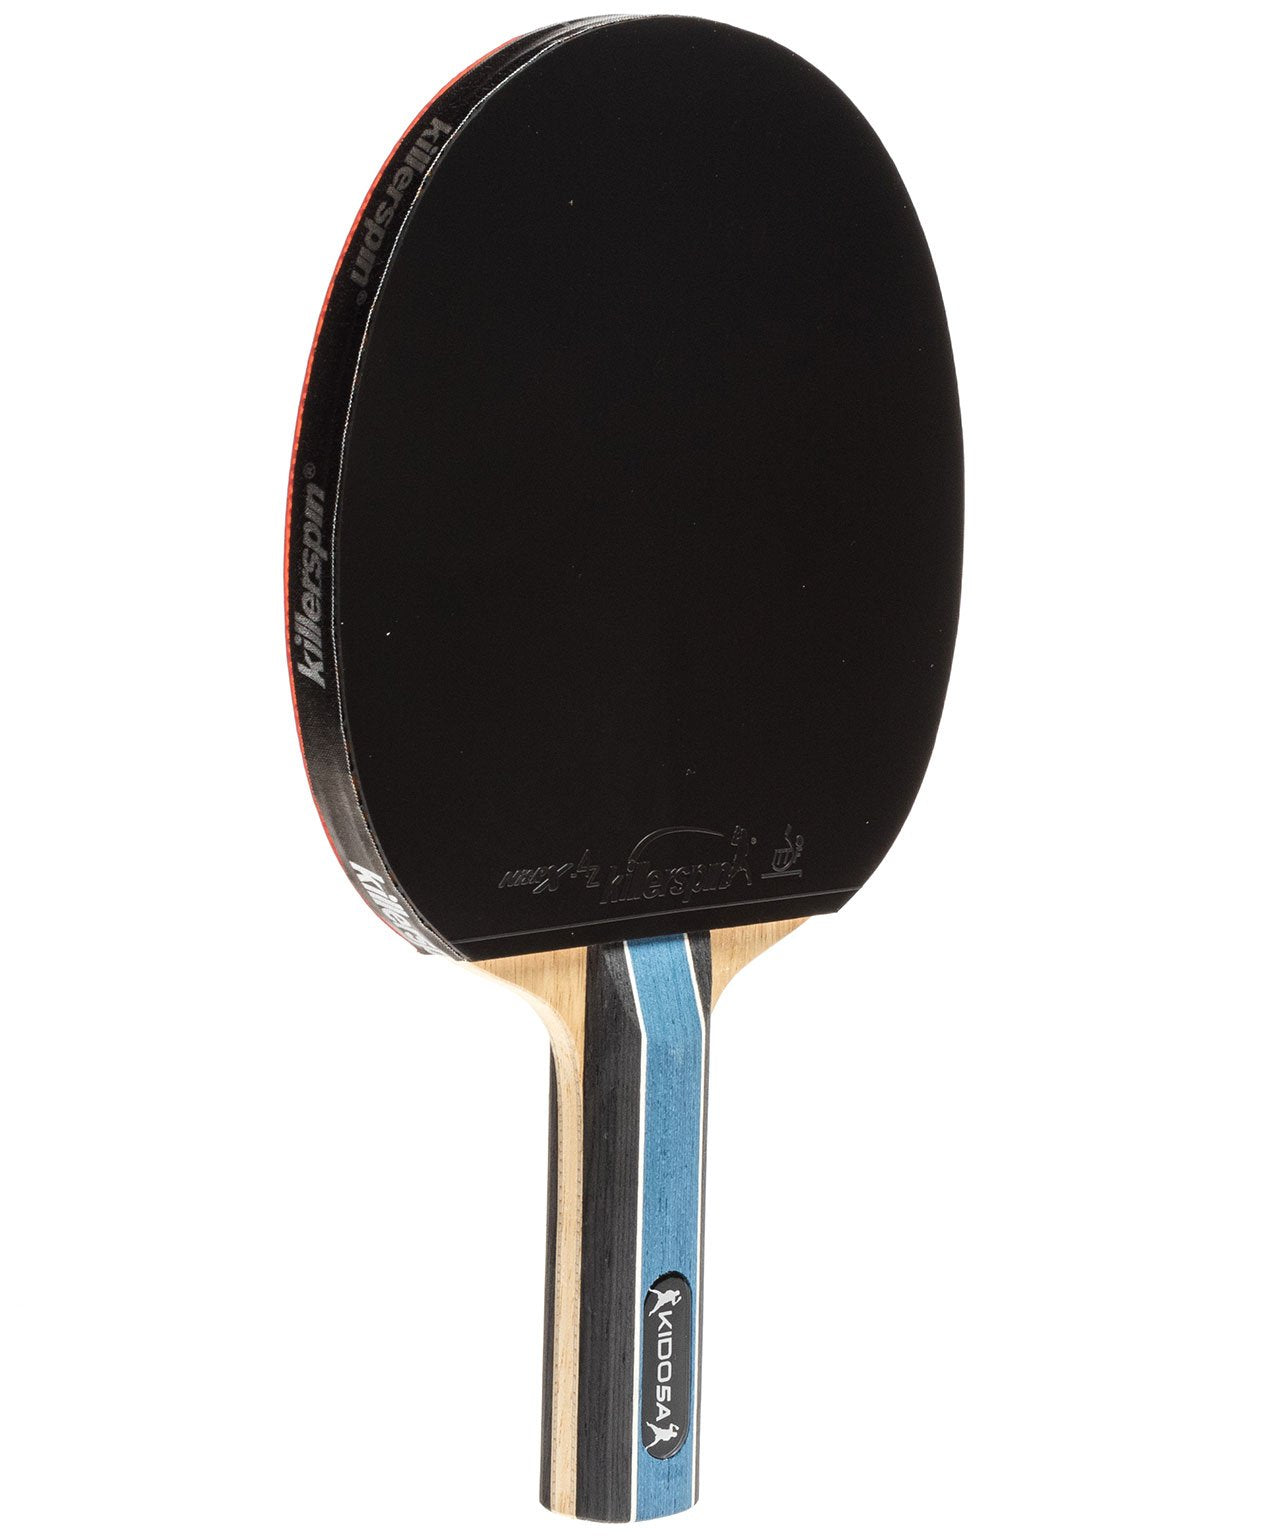 Killerspin Ping Pong Racquet Kido 5A RTG - Straight Black Rubber